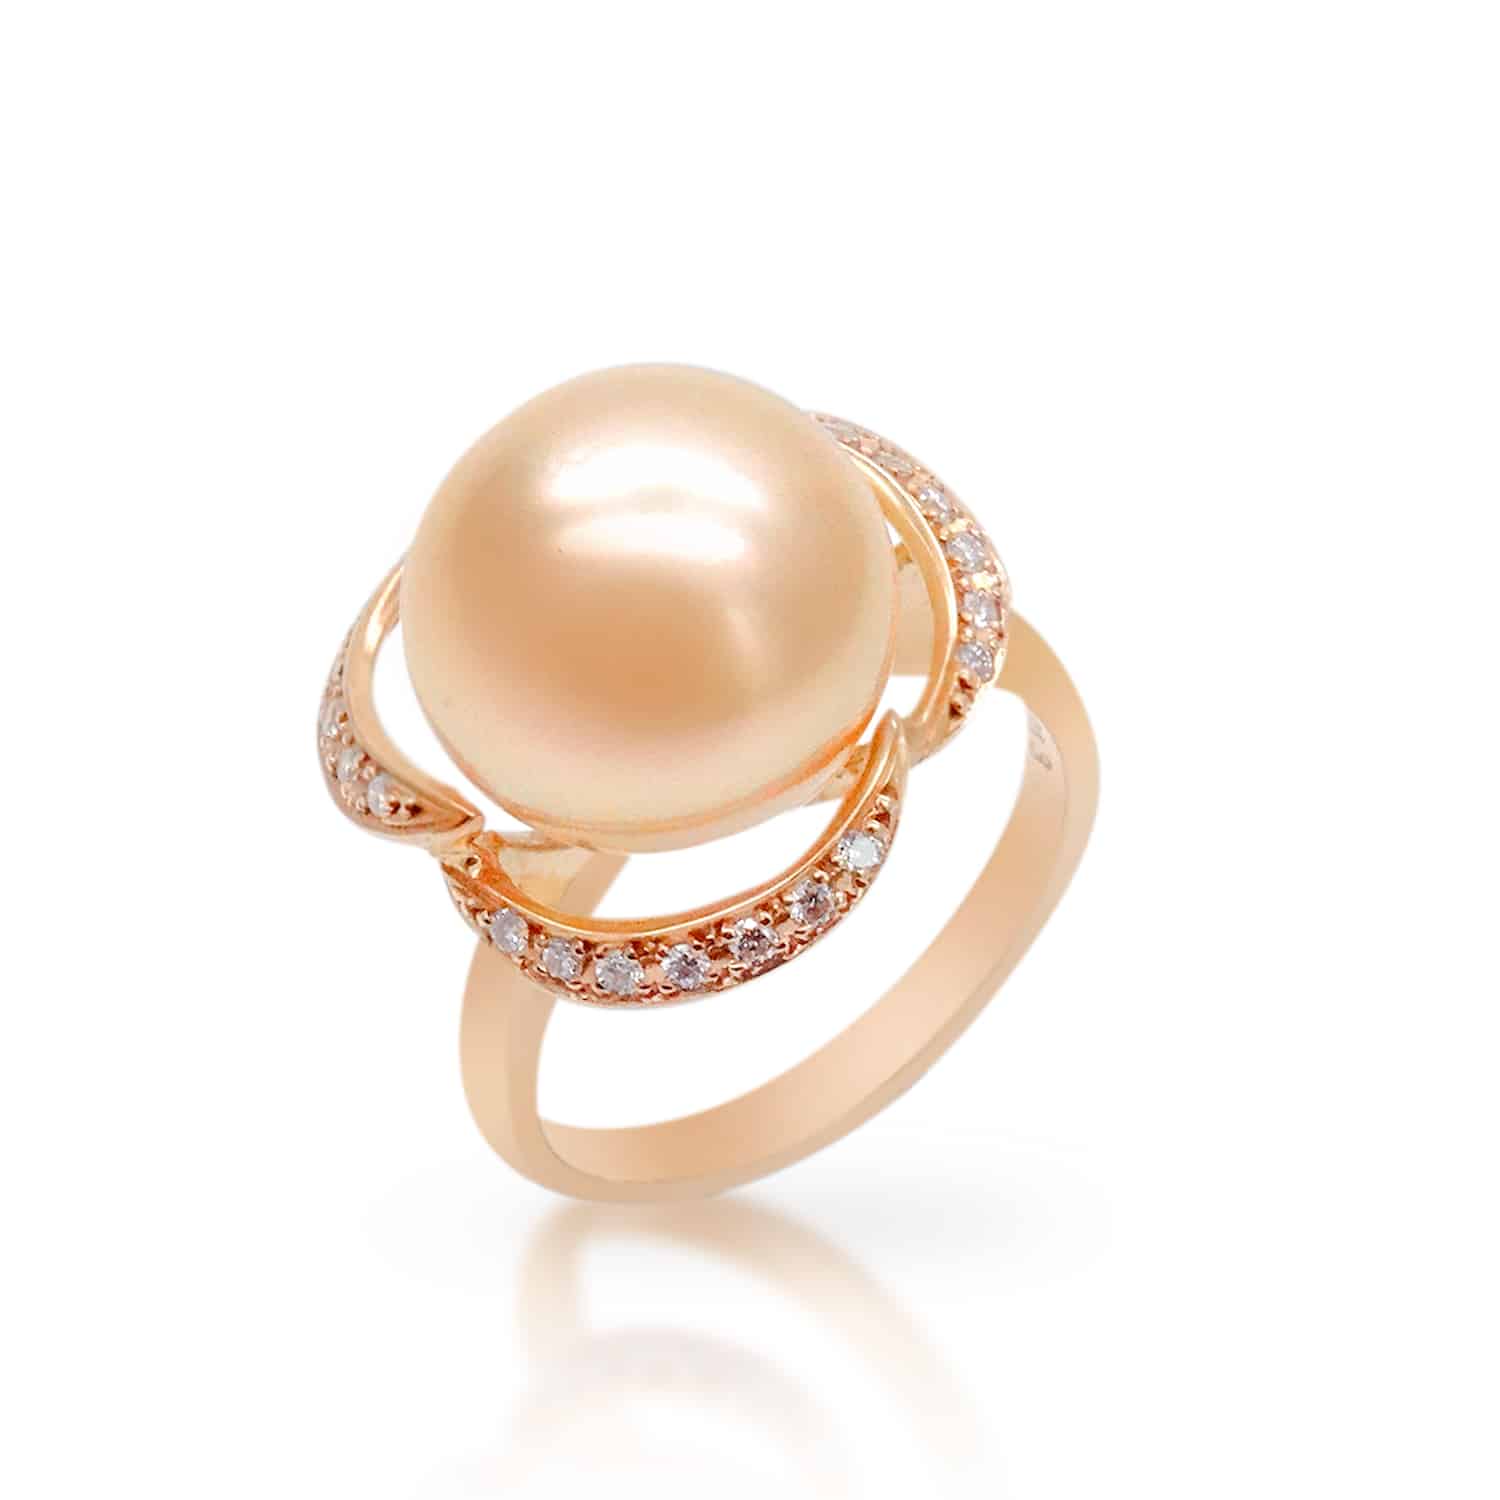 Discover The Beauty And Elegance Of South Sea Pearls The Ultimate